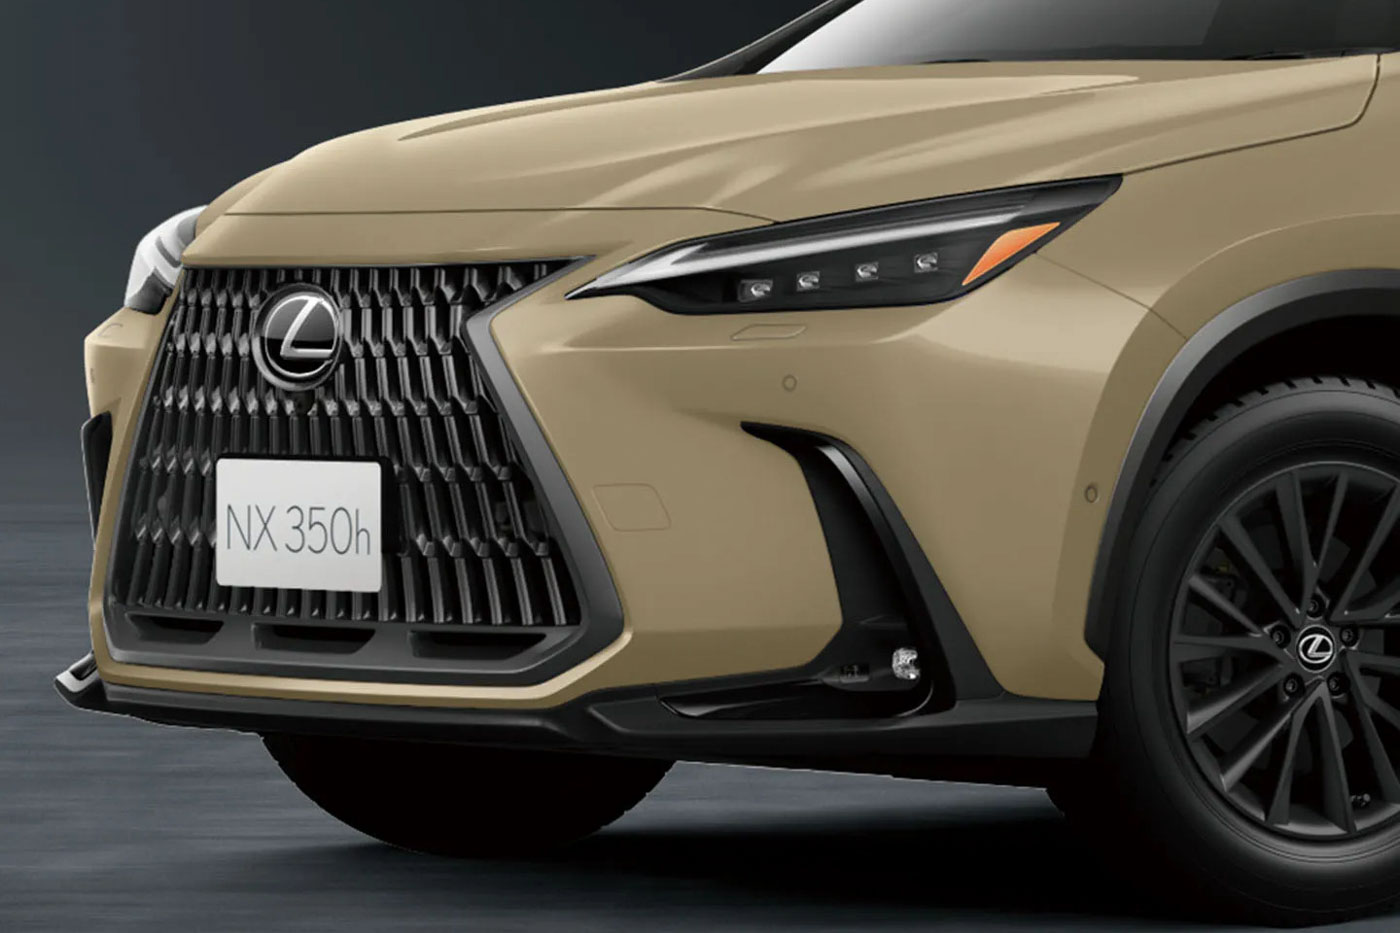 Enhancements and Introduction of New Overtrail Trim Elevate Lexus NX